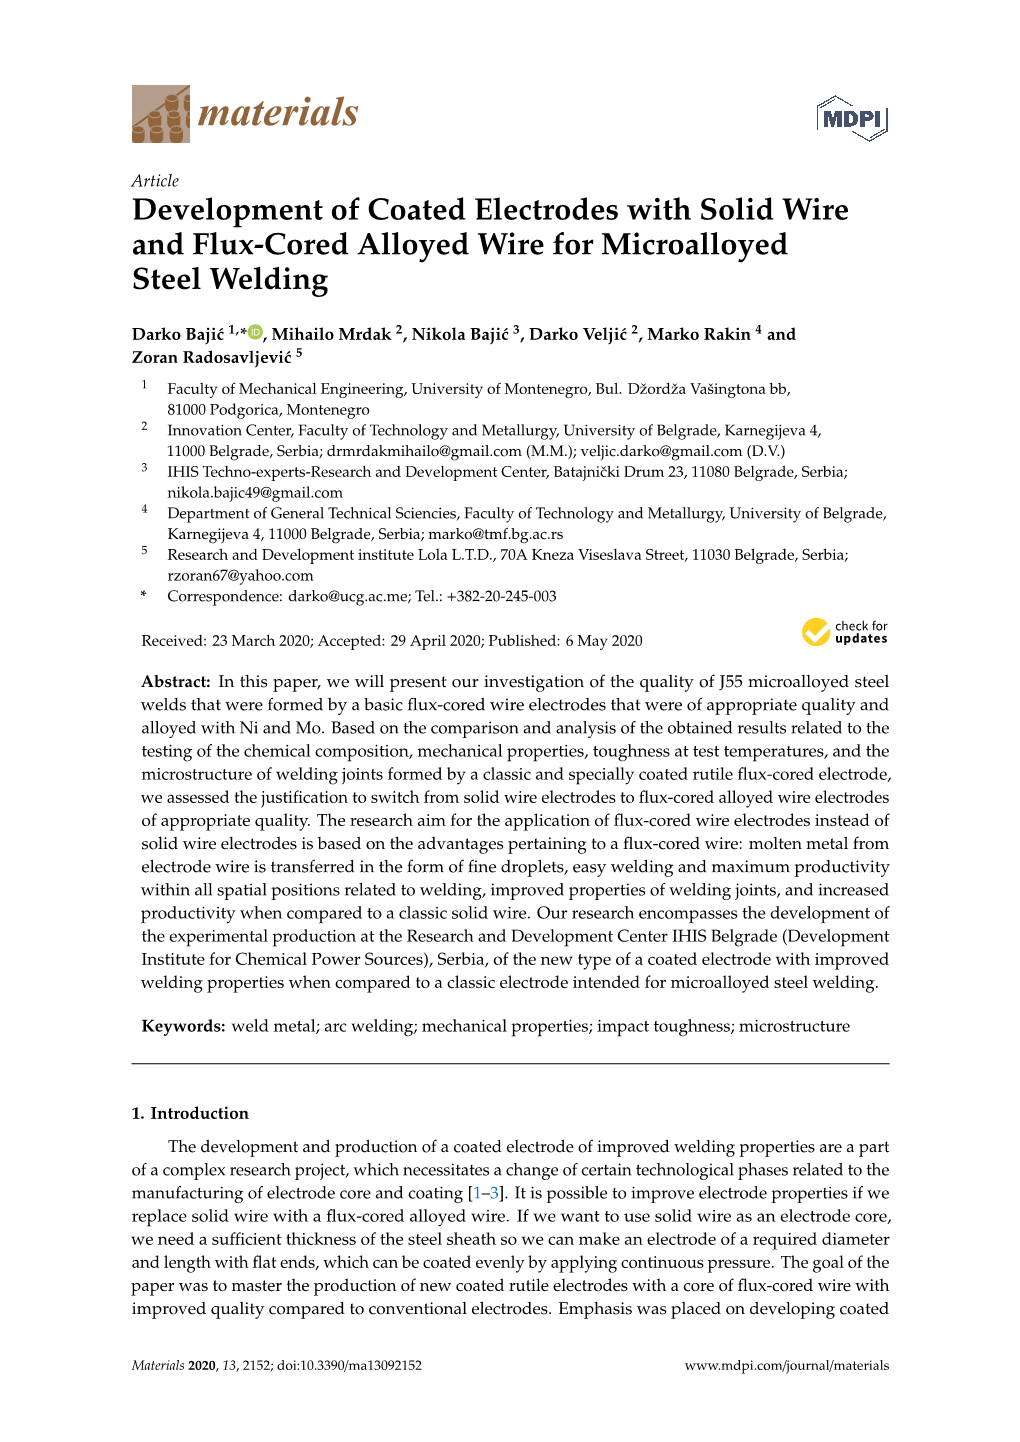 Development of Coated Electrodes with Solid Wire and Flux-Cored Alloyed Wire for Microalloyed Steel Welding